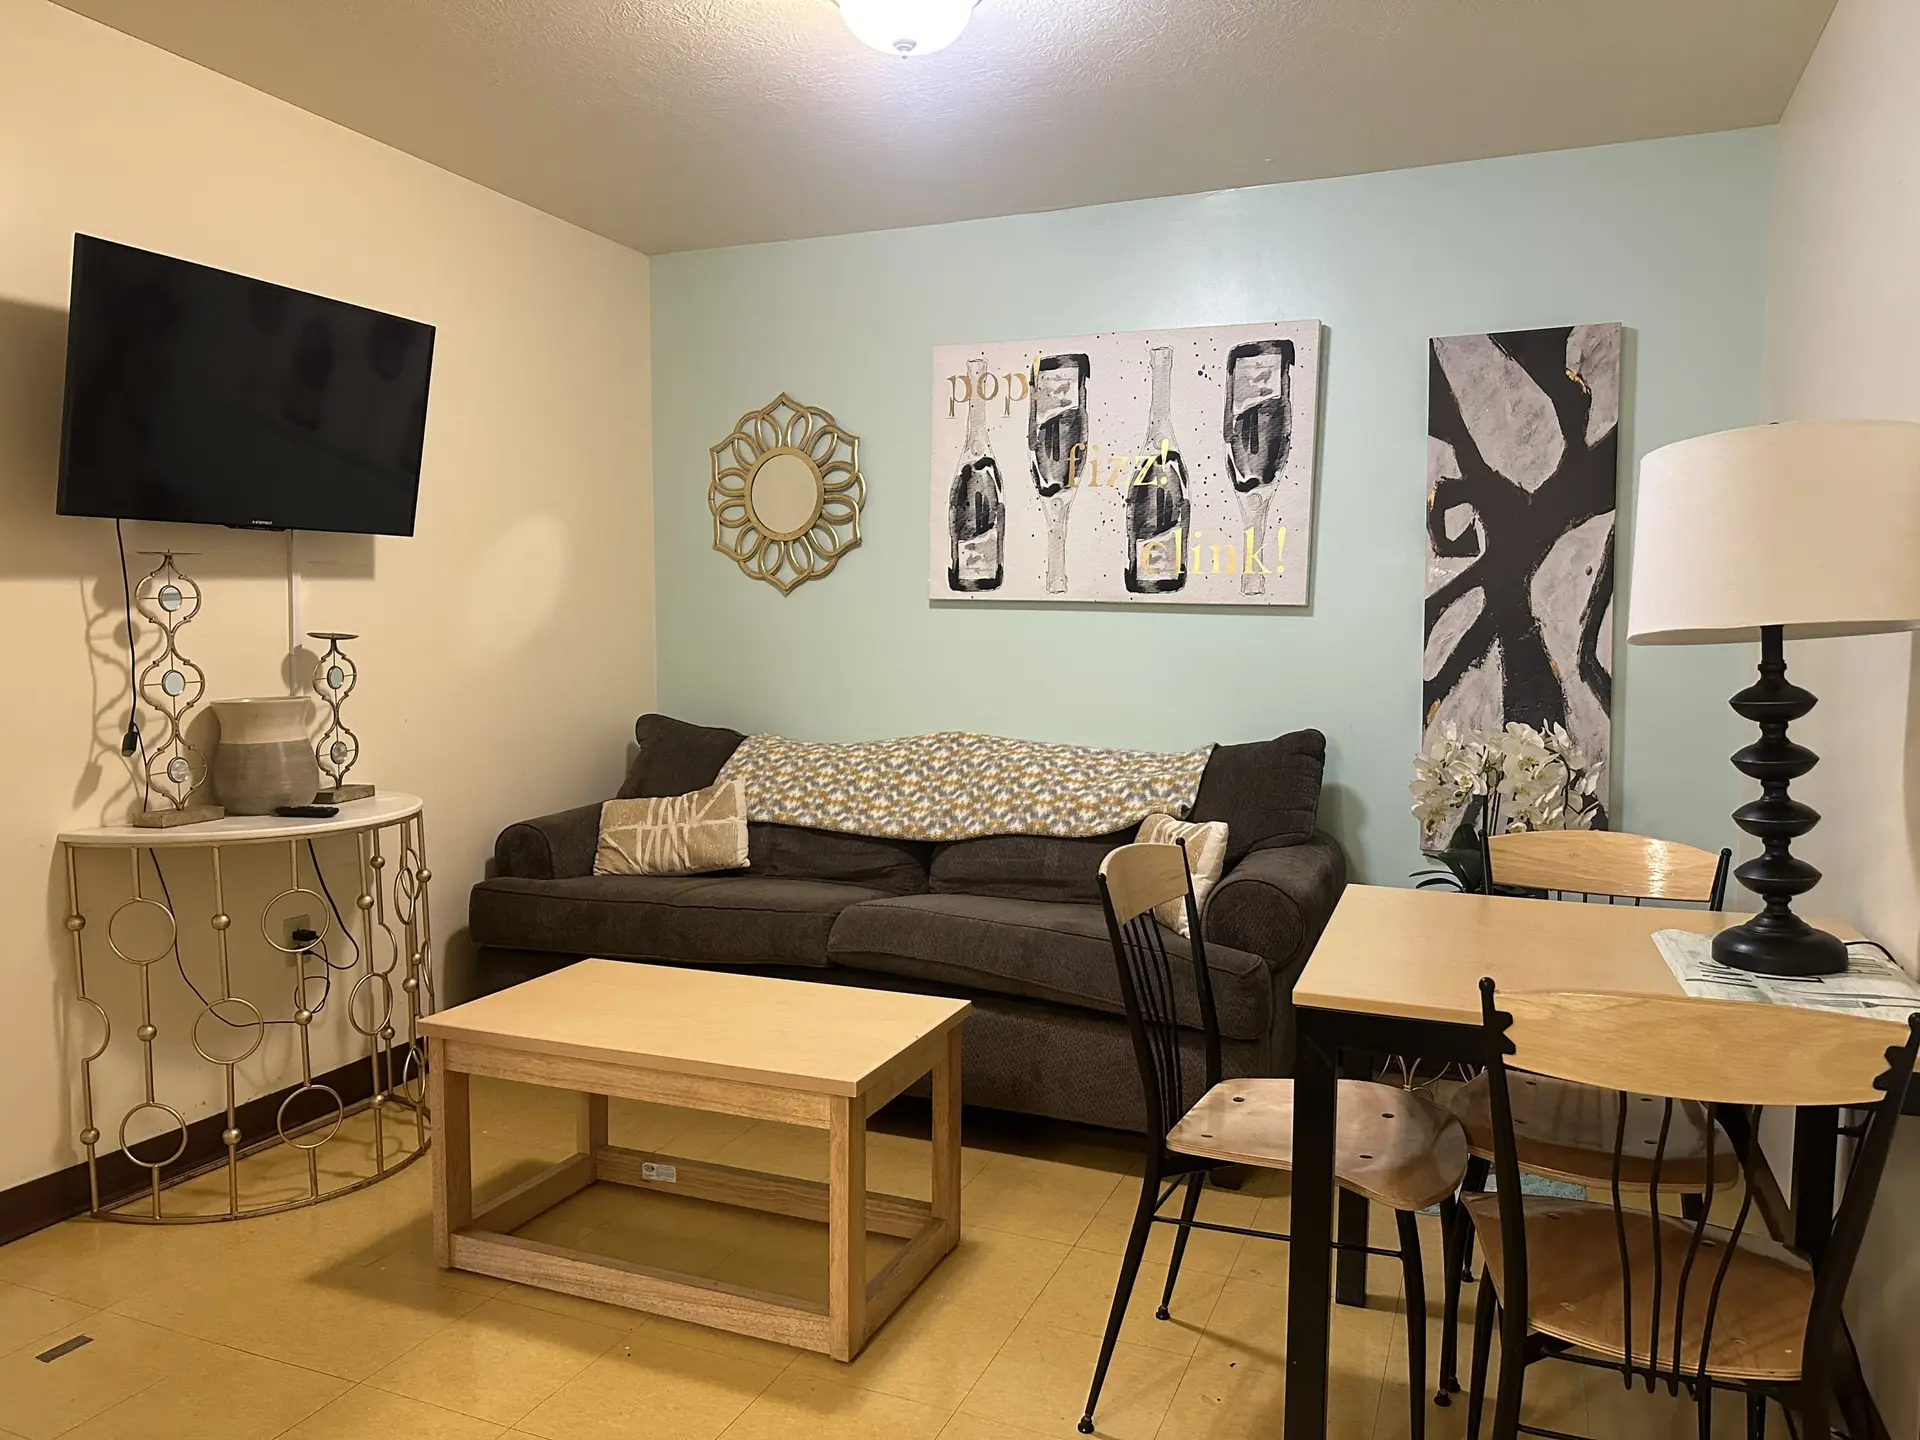 2 Bedroom 2 Bath Apartment | Heart of Downtown PIT